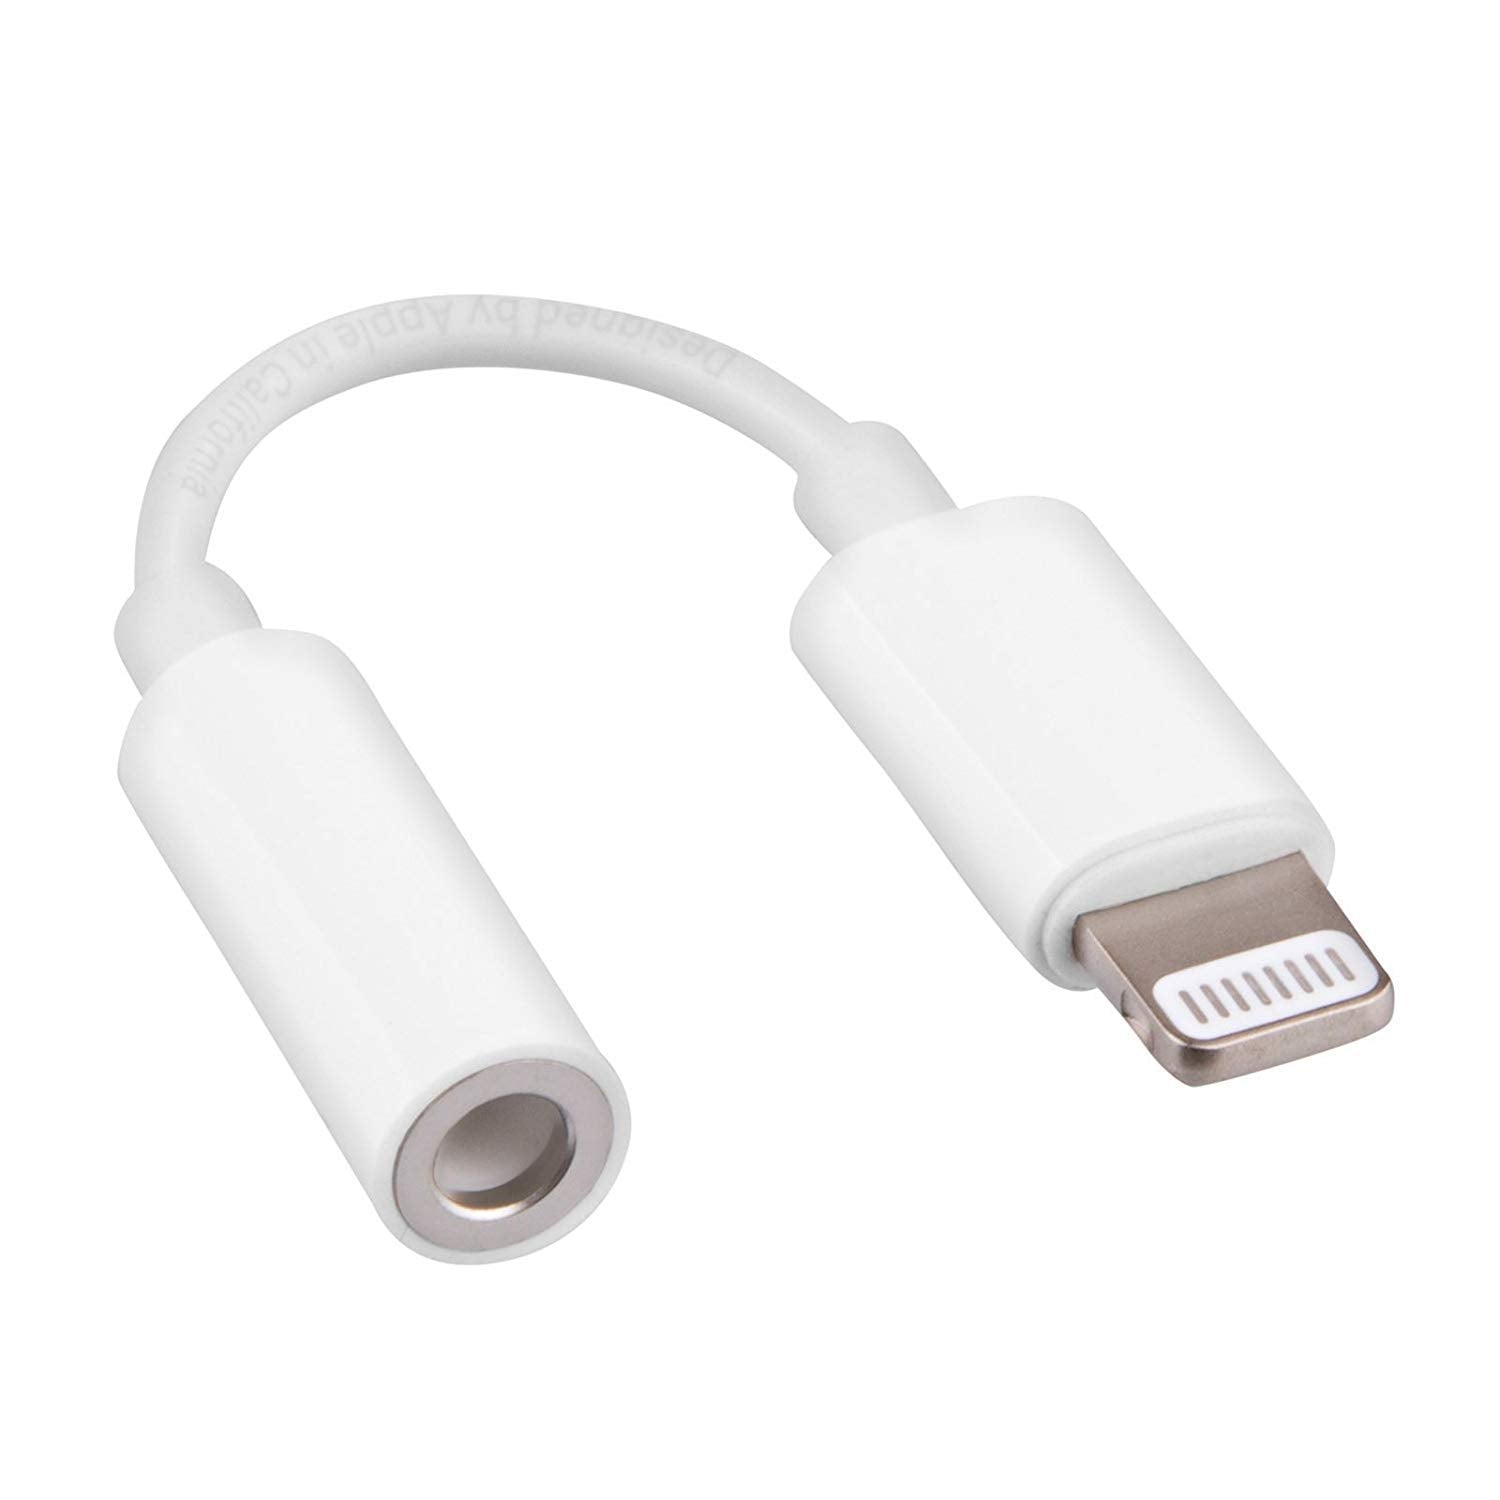 Apple iPhone 5S Heaphone Jack Connector (Lightning to 3.5mm)